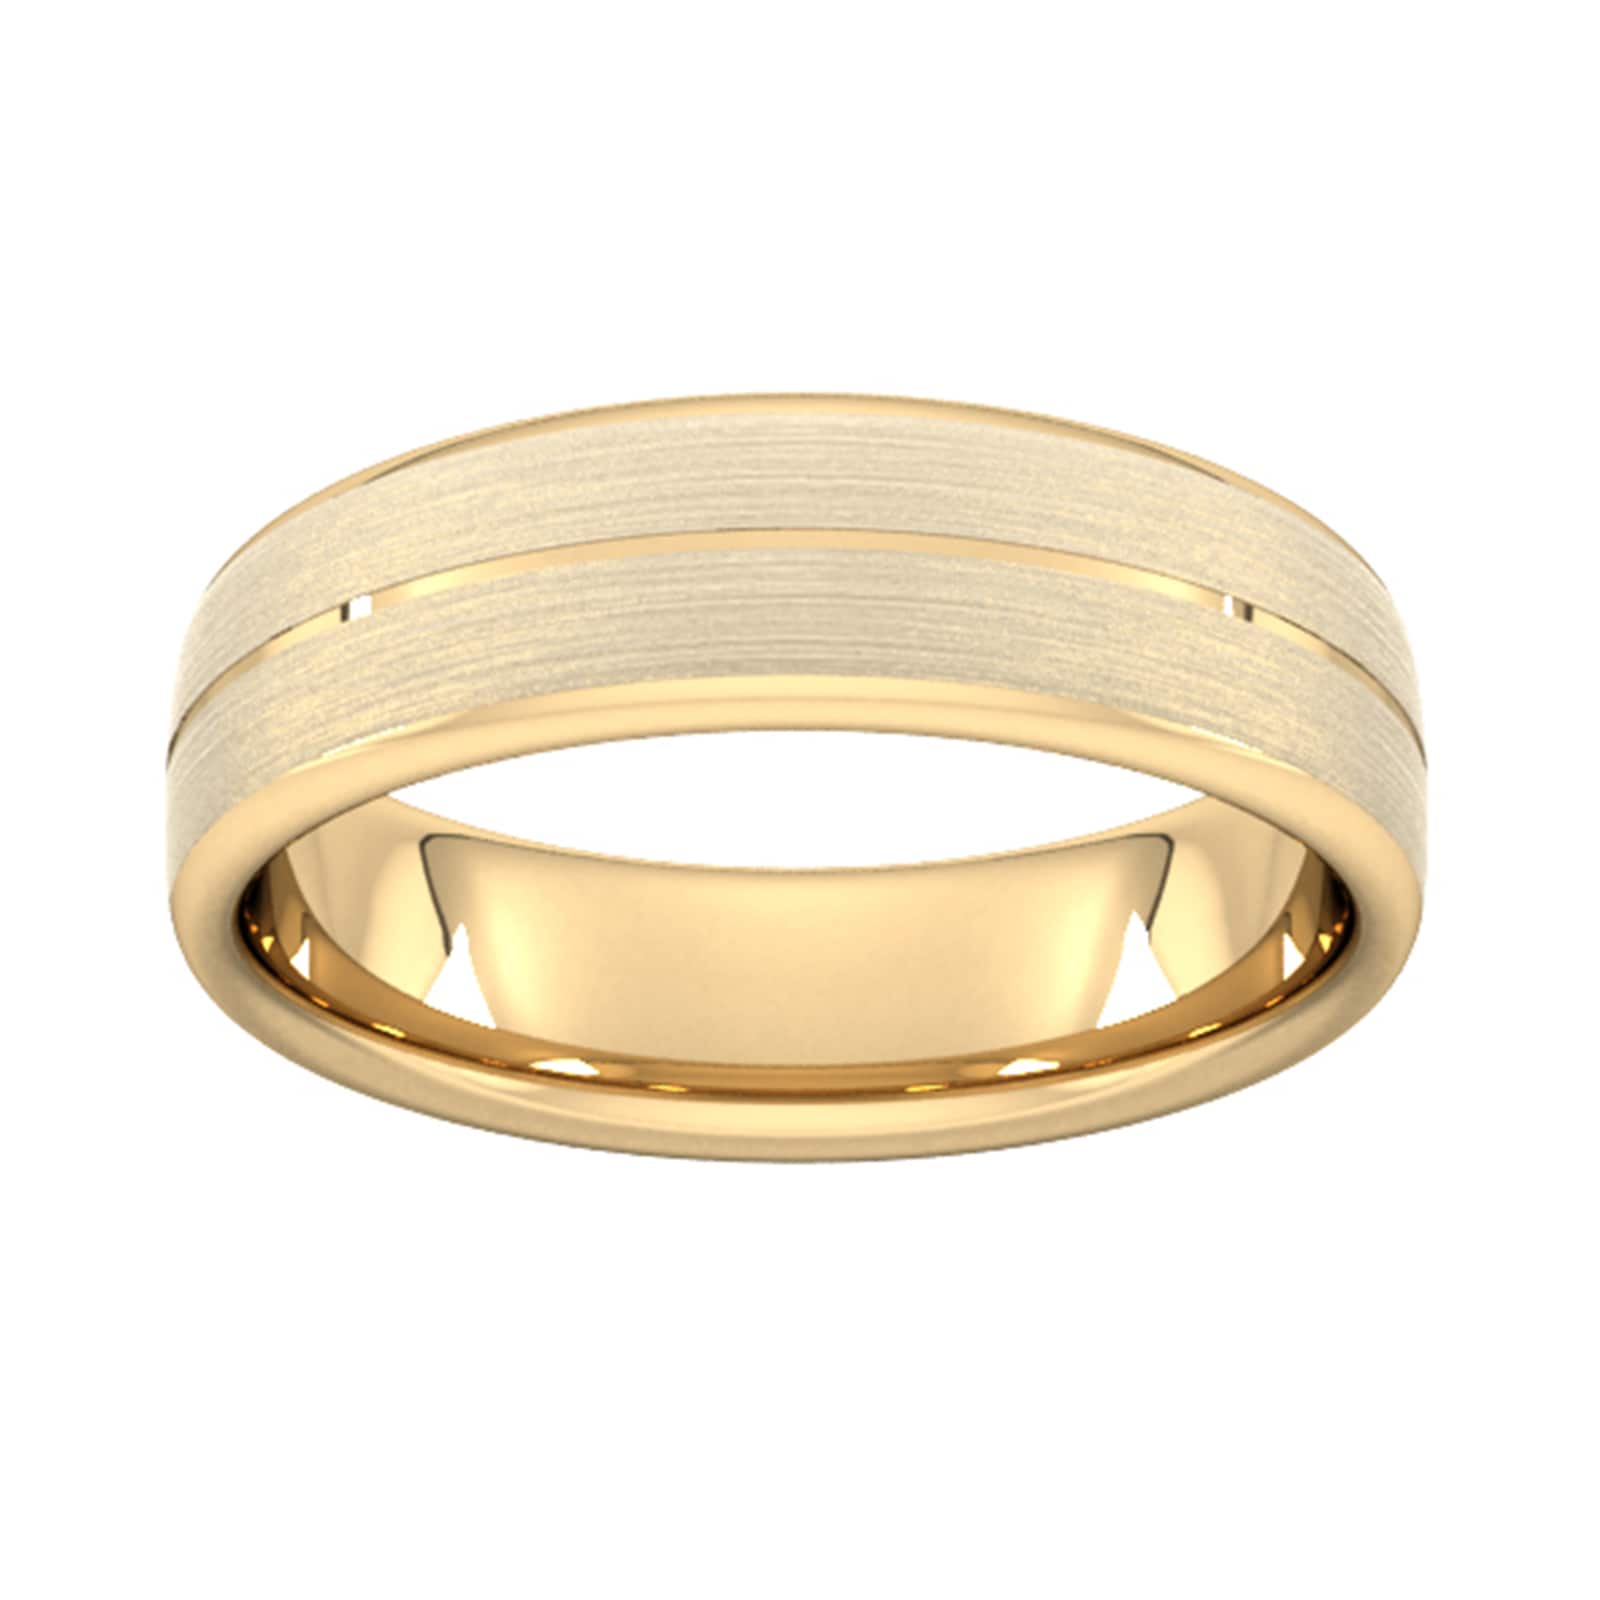 6mm Flat Court Heavy Centre Groove With Chamfered Edge Wedding Ring In 9 Carat Yellow Gold - Ring Size L